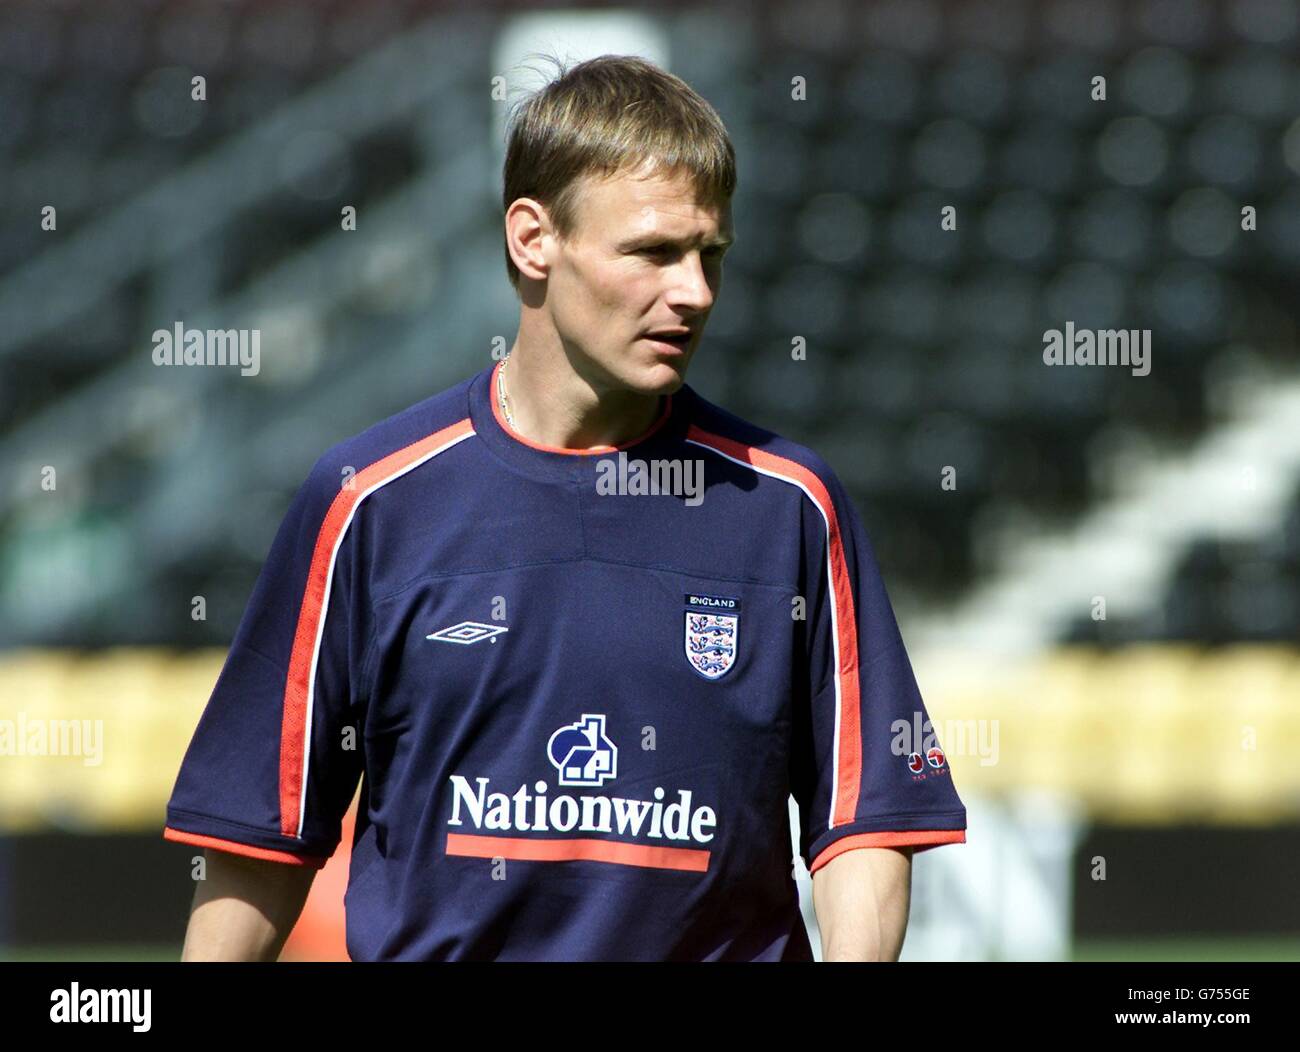 England's Teddy Sheringham training at Pride Park, Derby. * 30/9/01: Teddy Sheringham has been recalled to the England squad for the World Cup qualifier against Greece as Frank Lampard paid the price for his recent drinking spree as he was dropped. With Michael Owen and Alan Smith out injured, Sheringham won a recall ahead of Chris Sutton or Kevin Phillips, while West Ham's Trevor Sinclair also won his first England summons since February. . Stock Photo